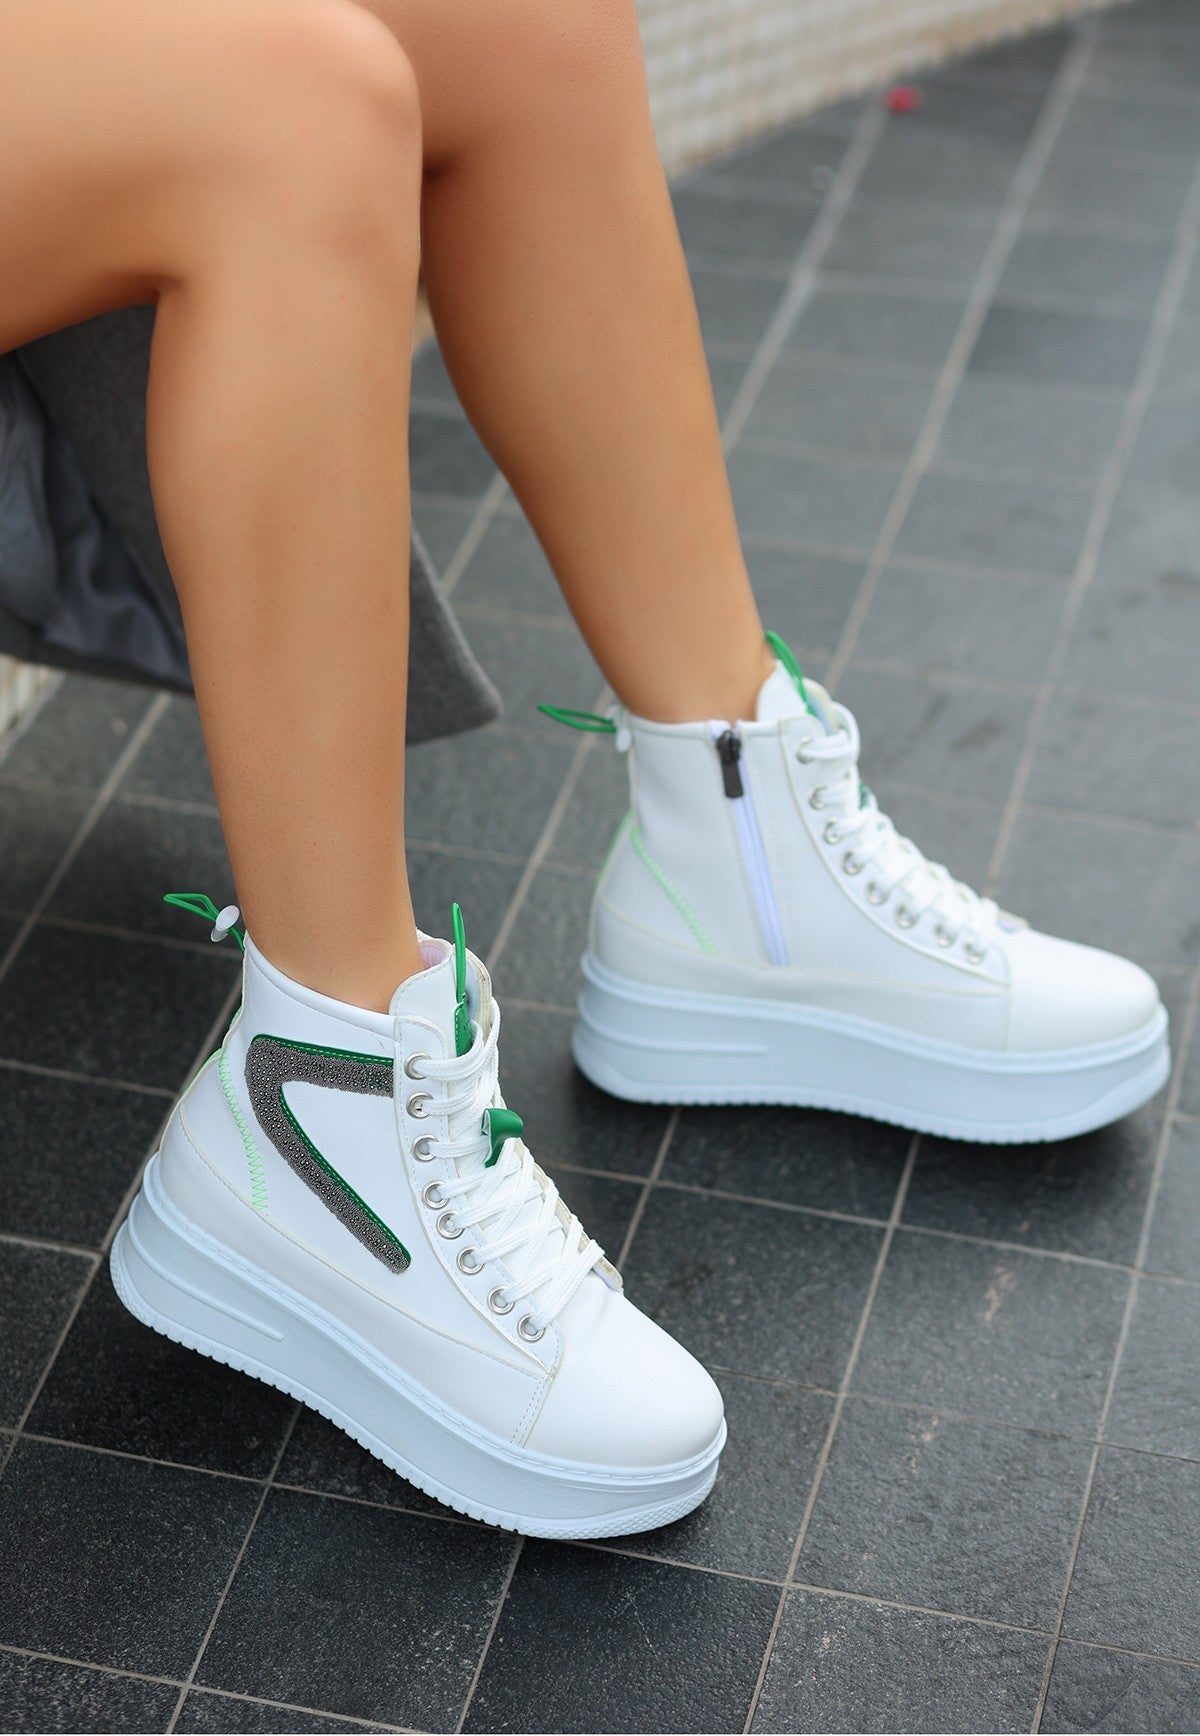 Women's Pone White Skin Green Detailed Lace Up Sneakers Boots - STREETMODE ™